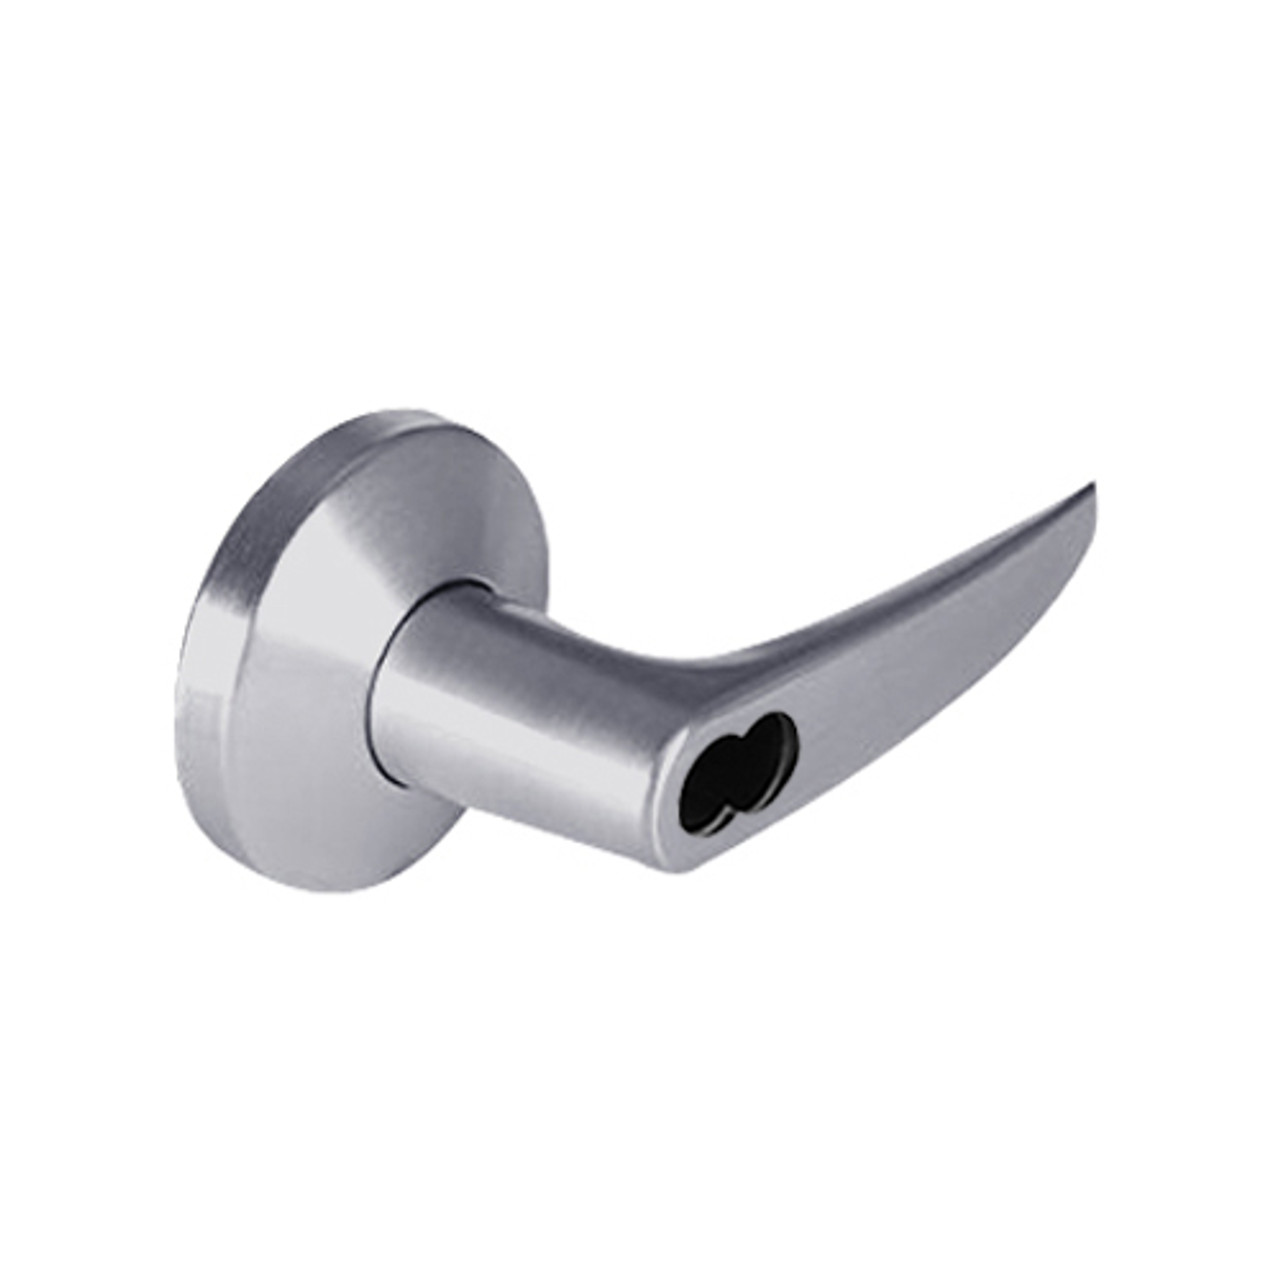 9K37DR16KSTK626 Best 9K Series Special Function Cylindrical Lever Locks with Curved without Return Lever Design Accept 7 Pin Best Core in Satin Chrome